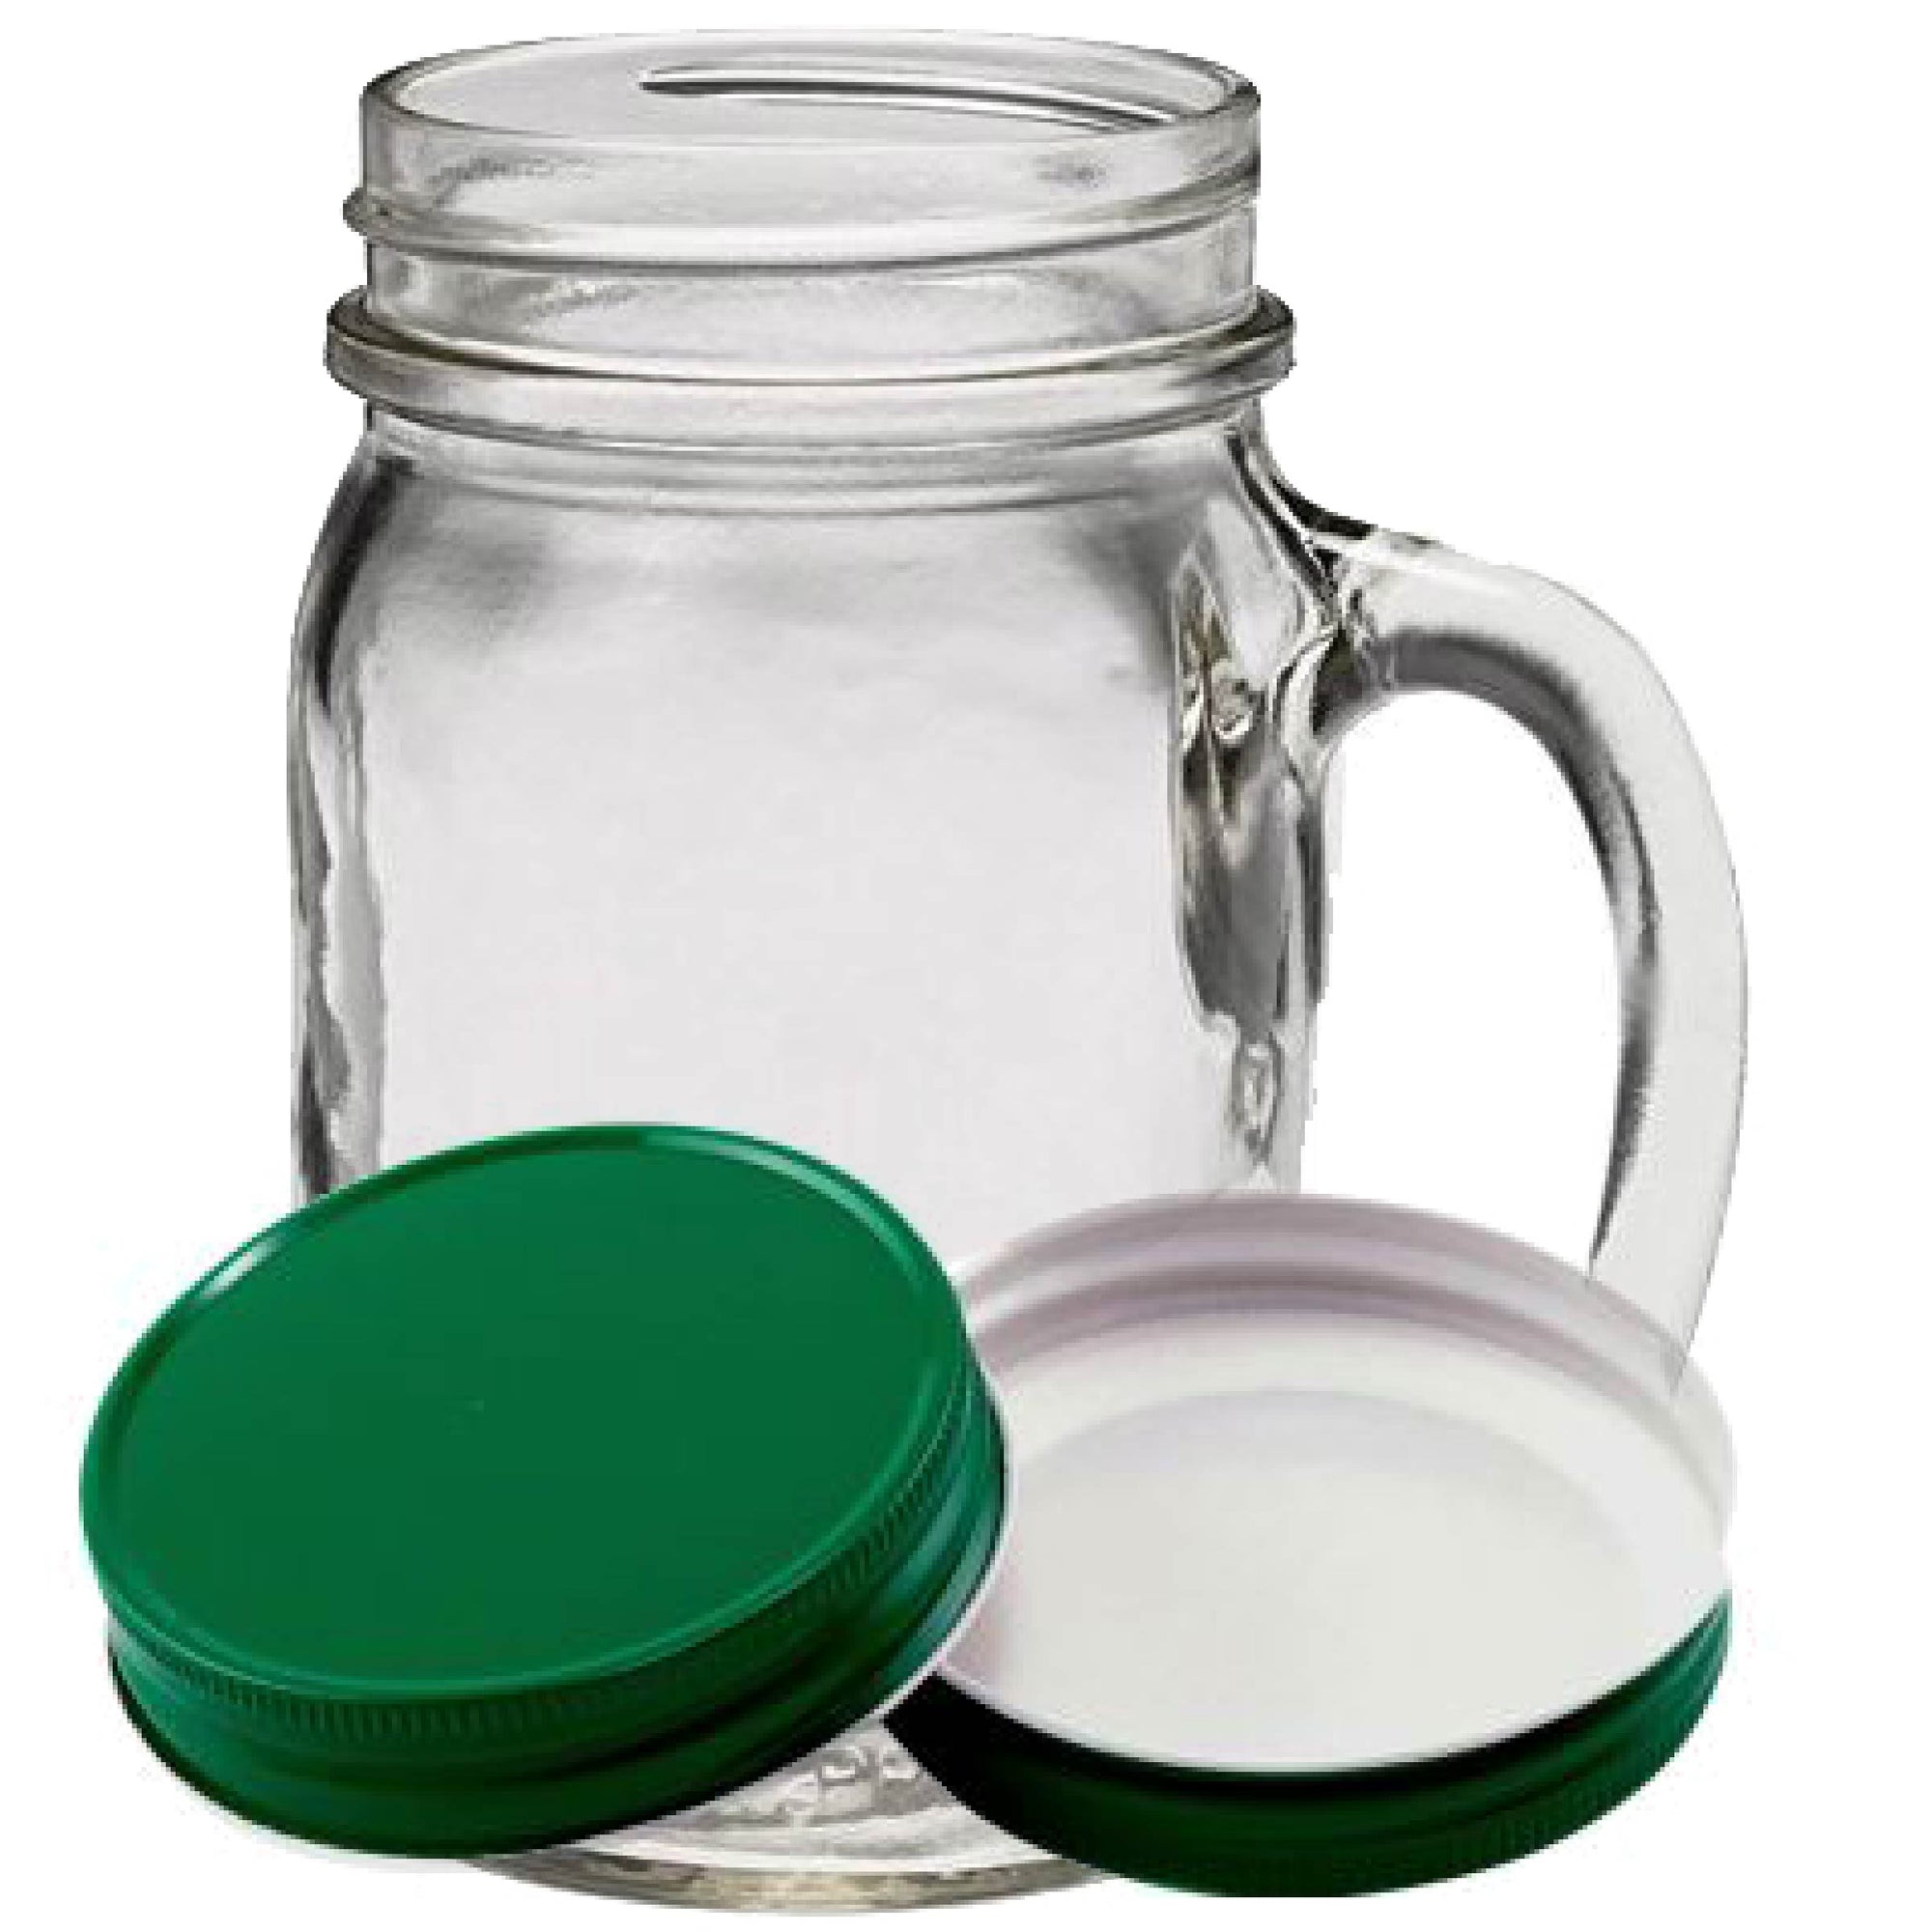 16oz. Glass Mason Jar with Green Lid - Versatile and Durable Container for Food Storage and Crafts | Buy Online